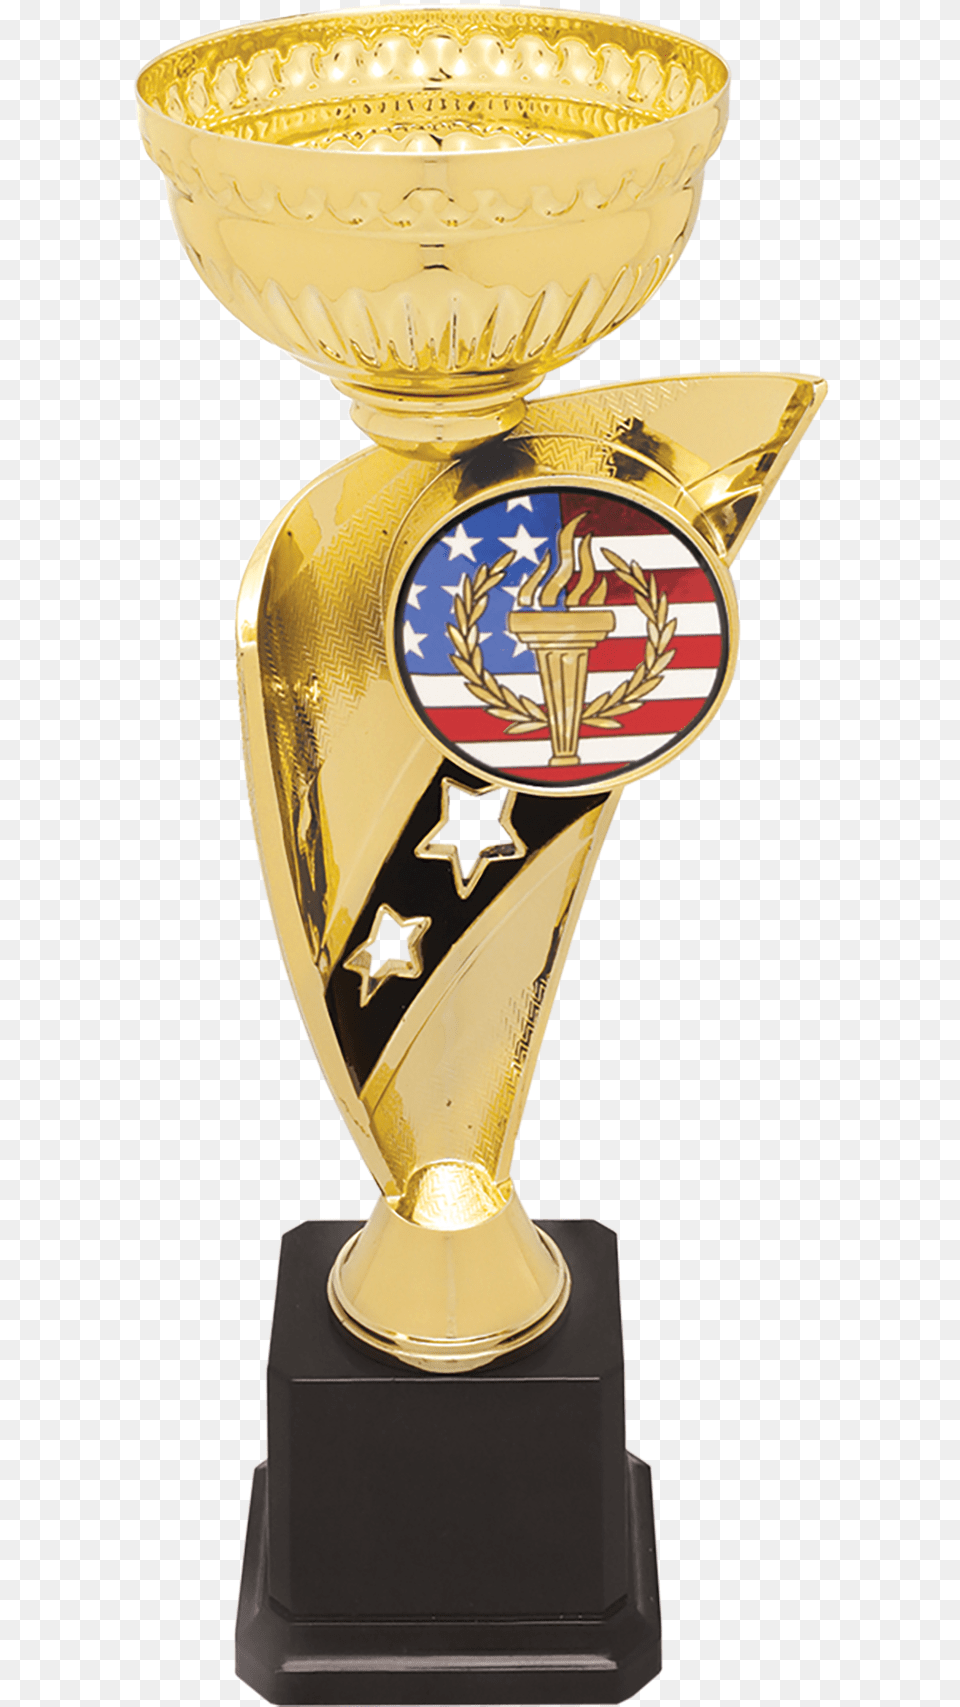 Trophy, Bottle, Cosmetics, Perfume Free Transparent Png